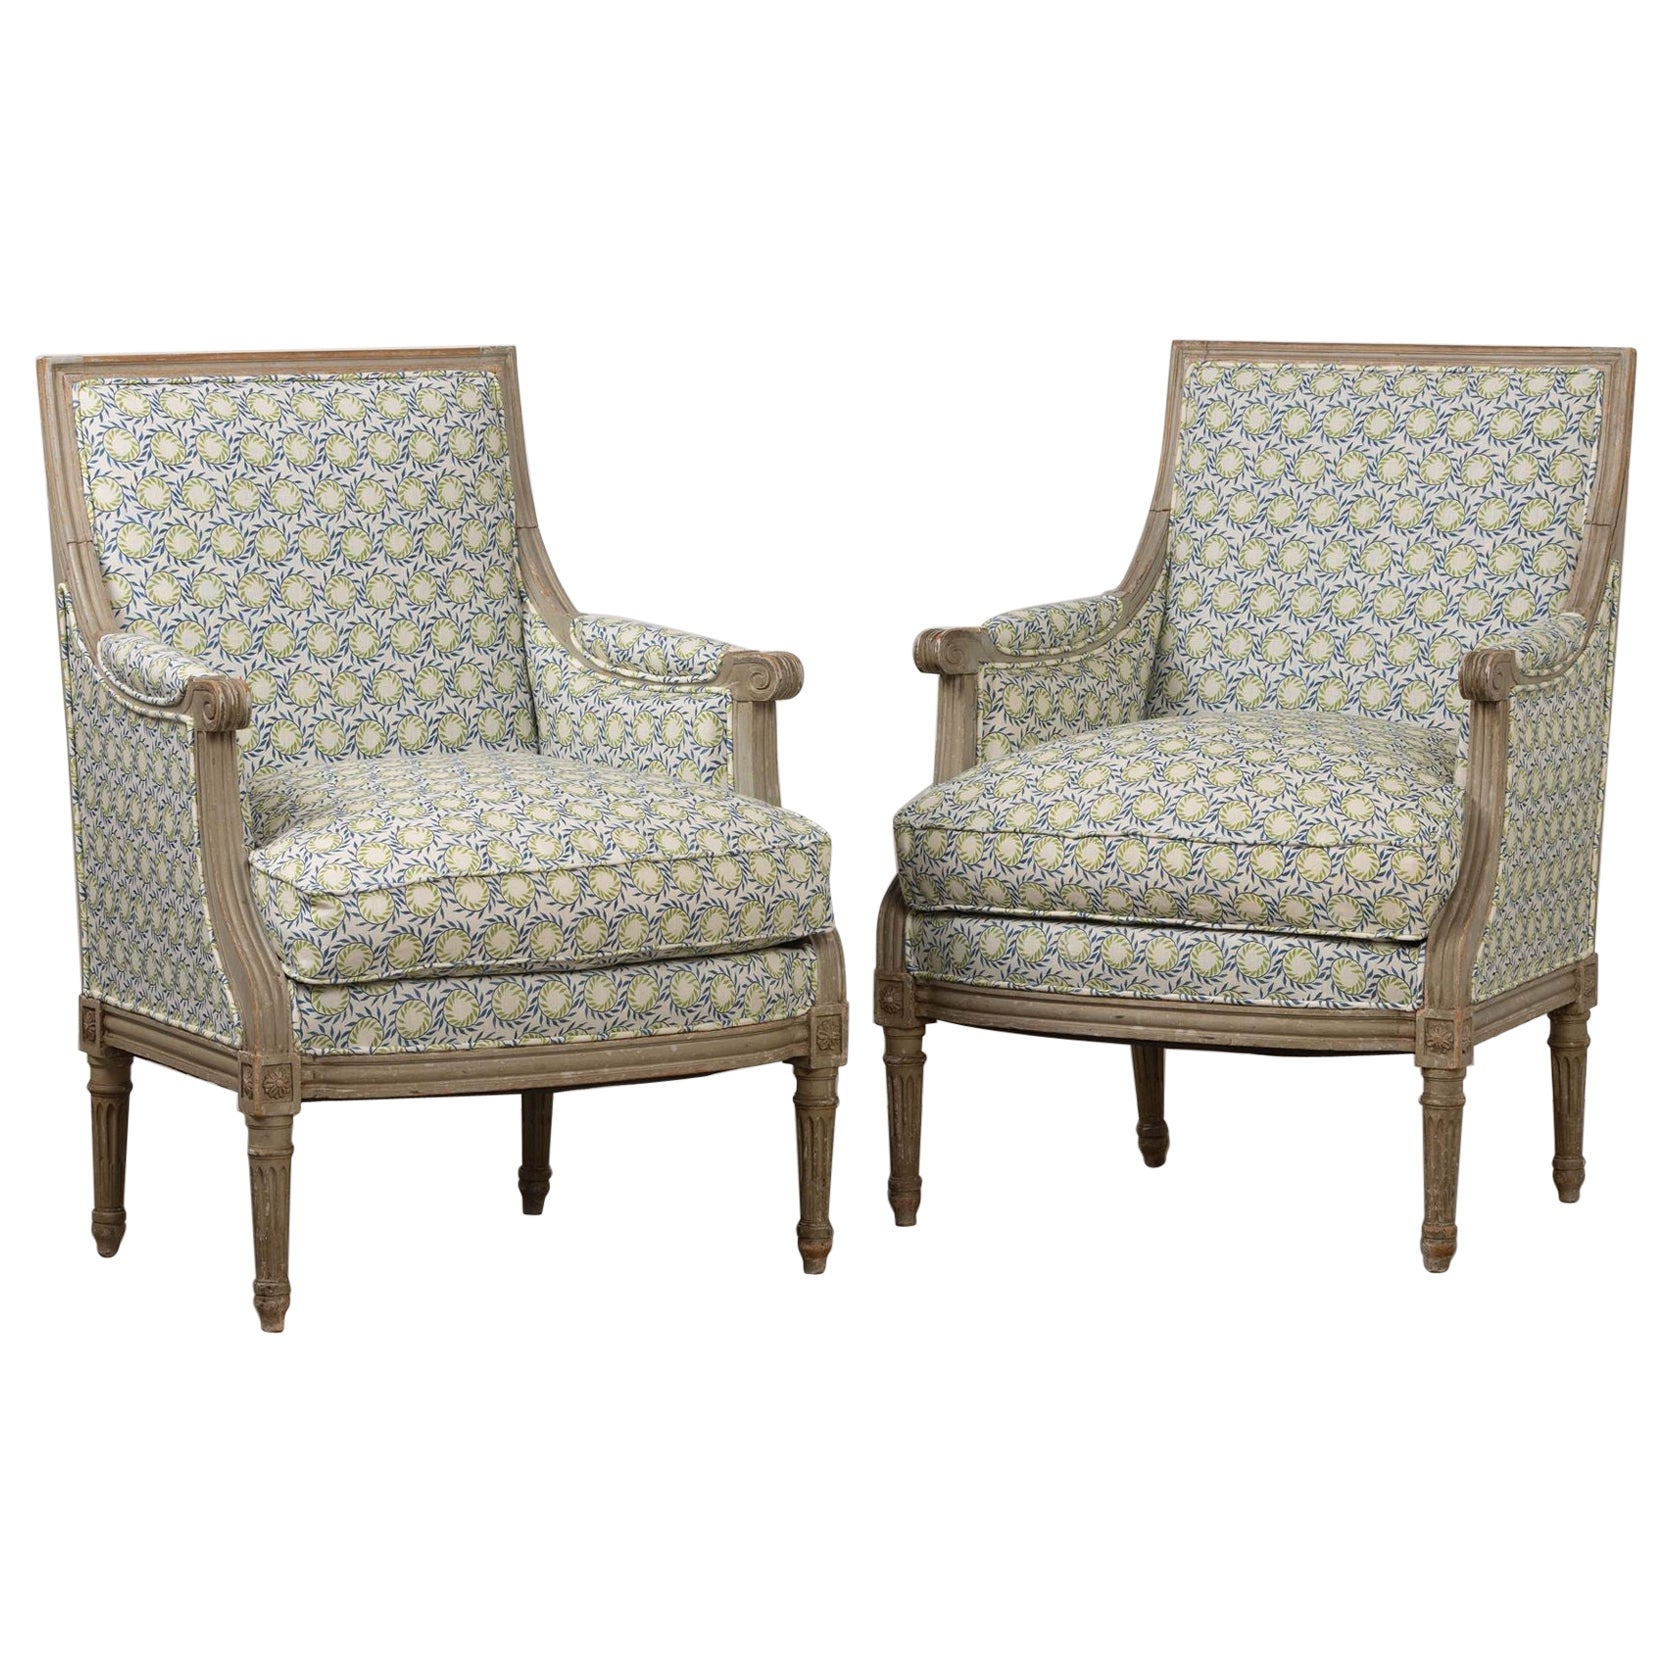 19th c. French Pair of Louis XVI Bergère Chairs in Original Paint For Sale